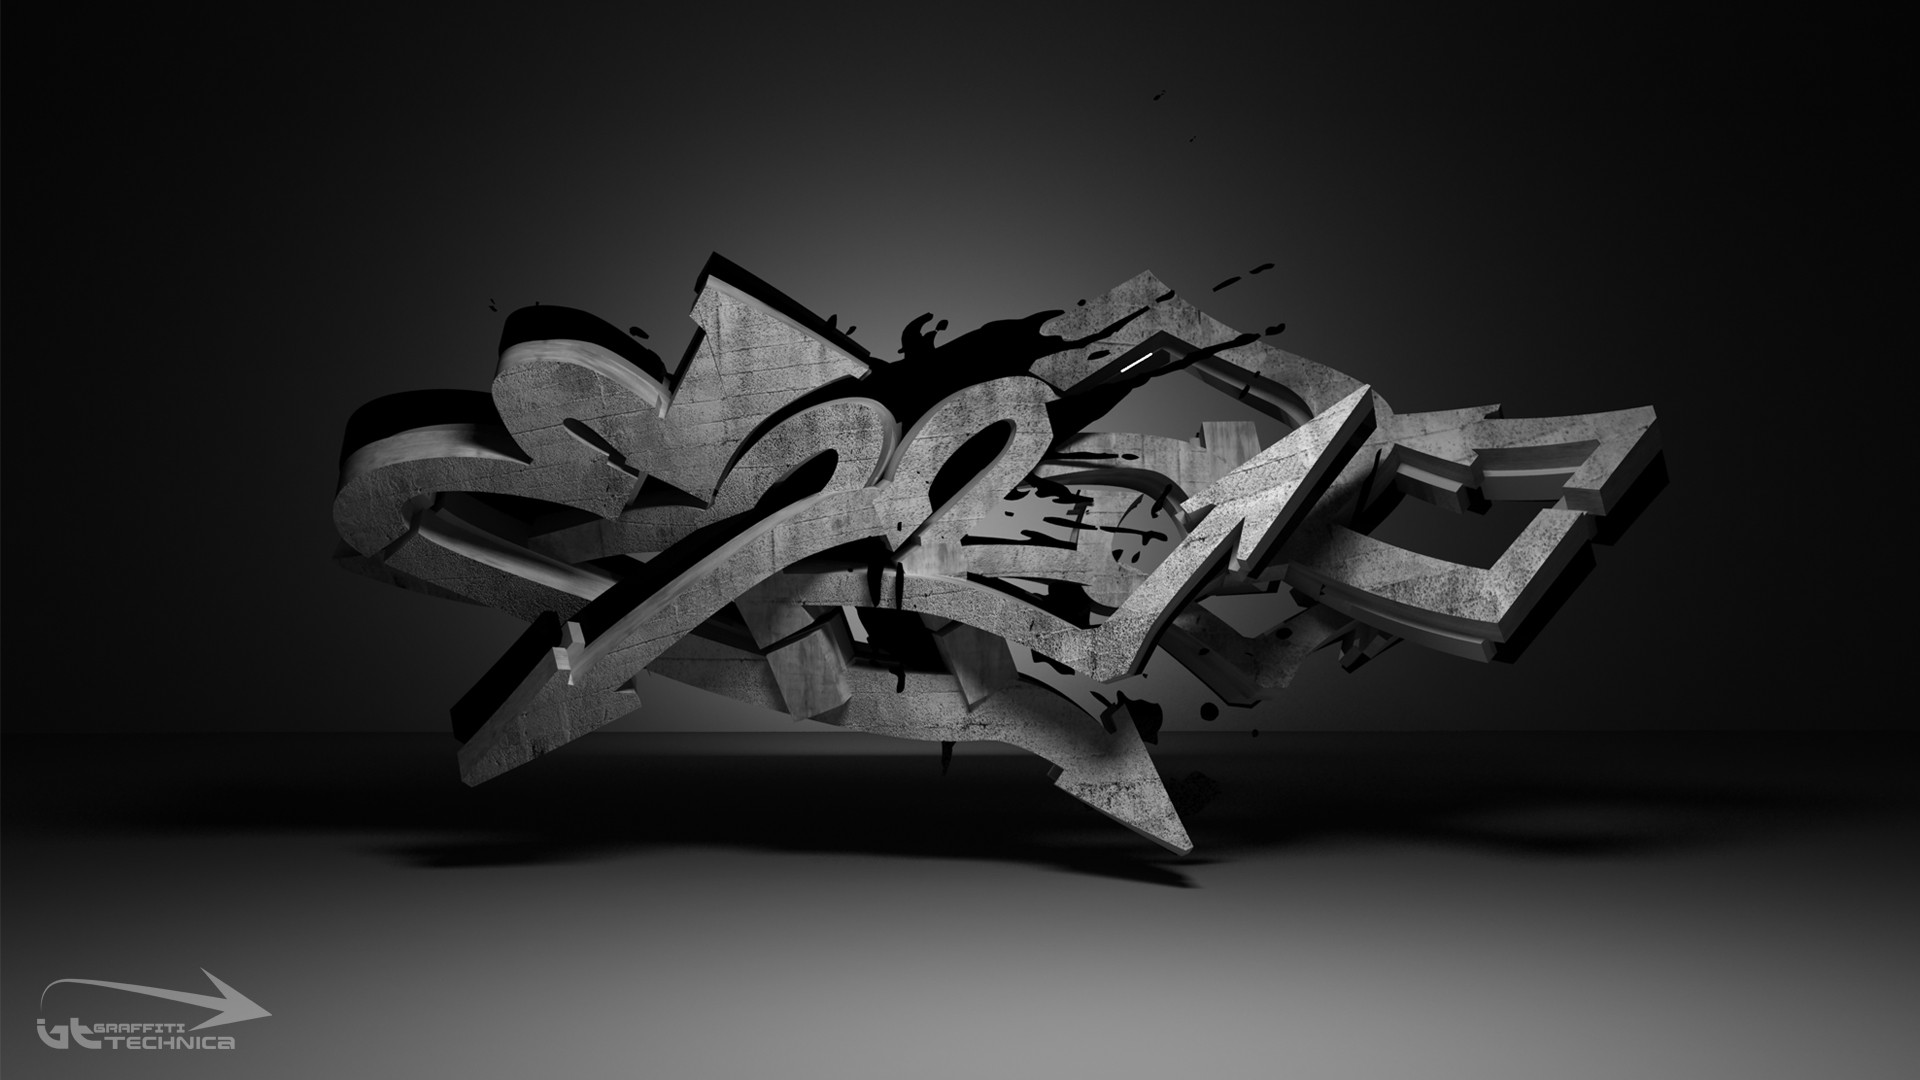 Graffiti Font HD Backgrounds With Resolution 1920X1080 pixel. You can make this wallpaper for your Desktop Computer Backgrounds, Mac Wallpapers, Android Lock screen or iPhone Screensavers